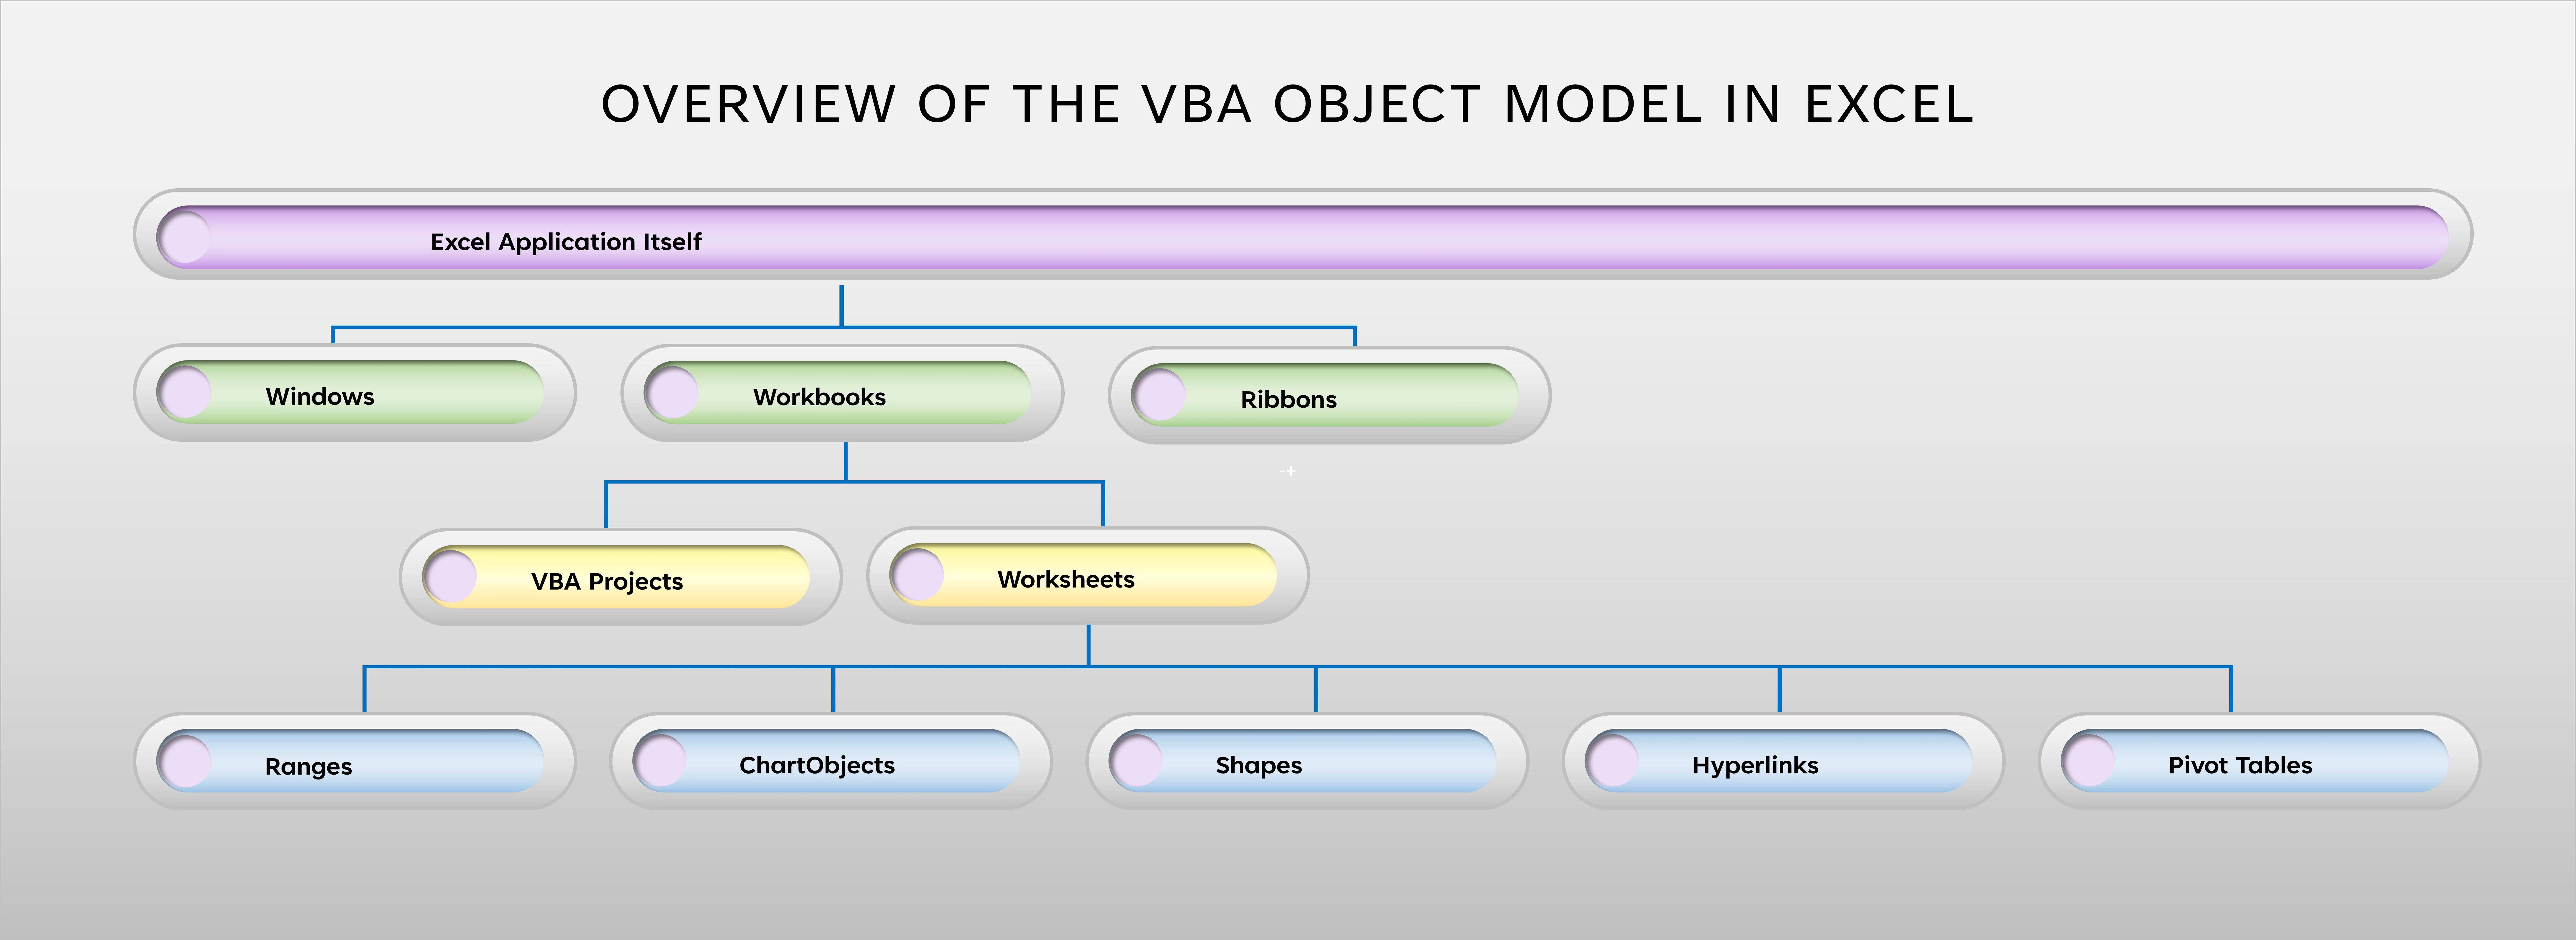 Graphic showing an overview of the VBA Object Model Hierarchy in Excel.